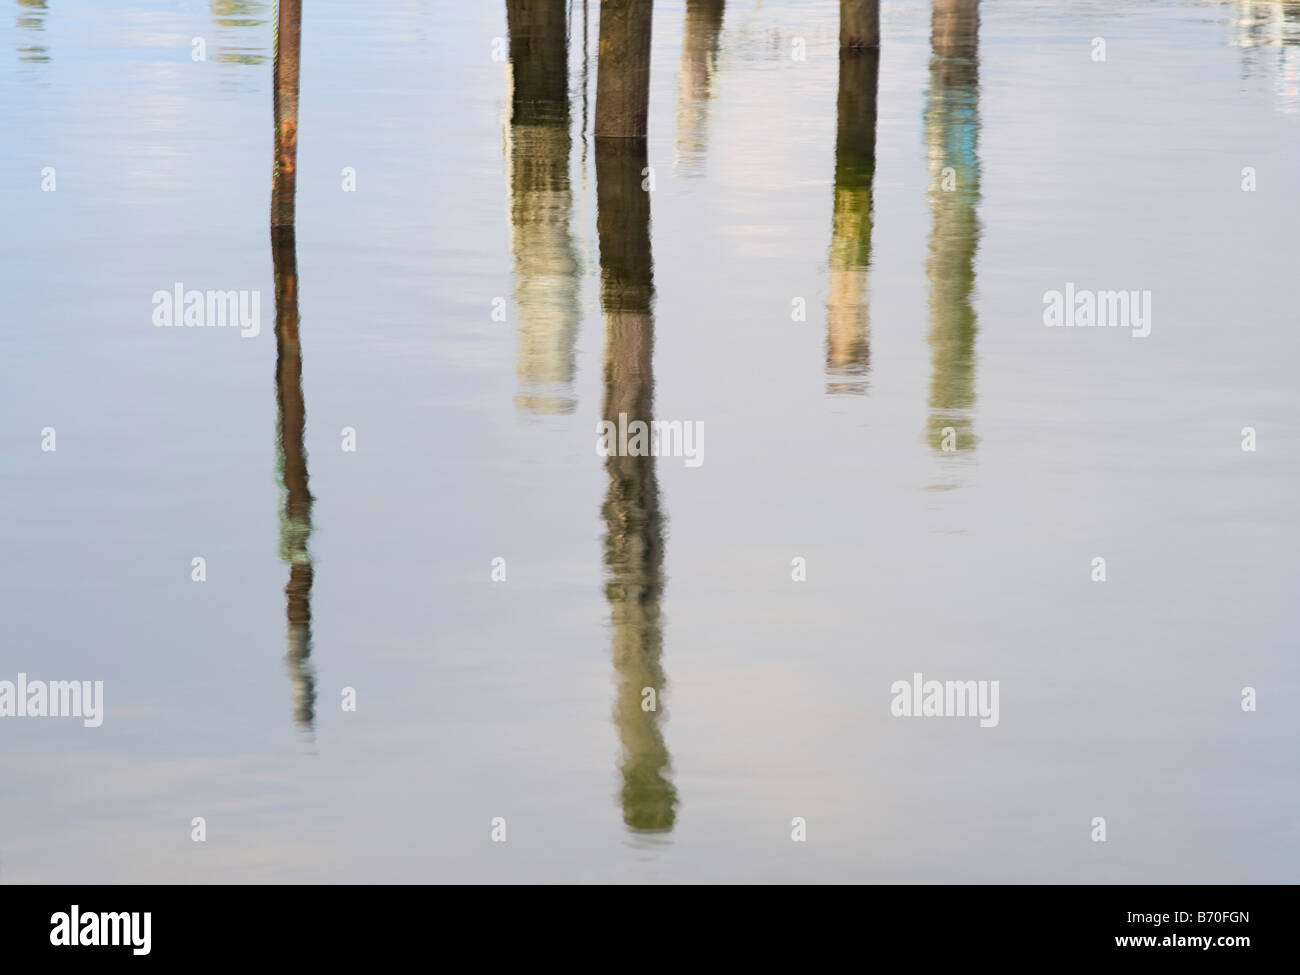 Poles reflected in water, Sweden Stock Photo